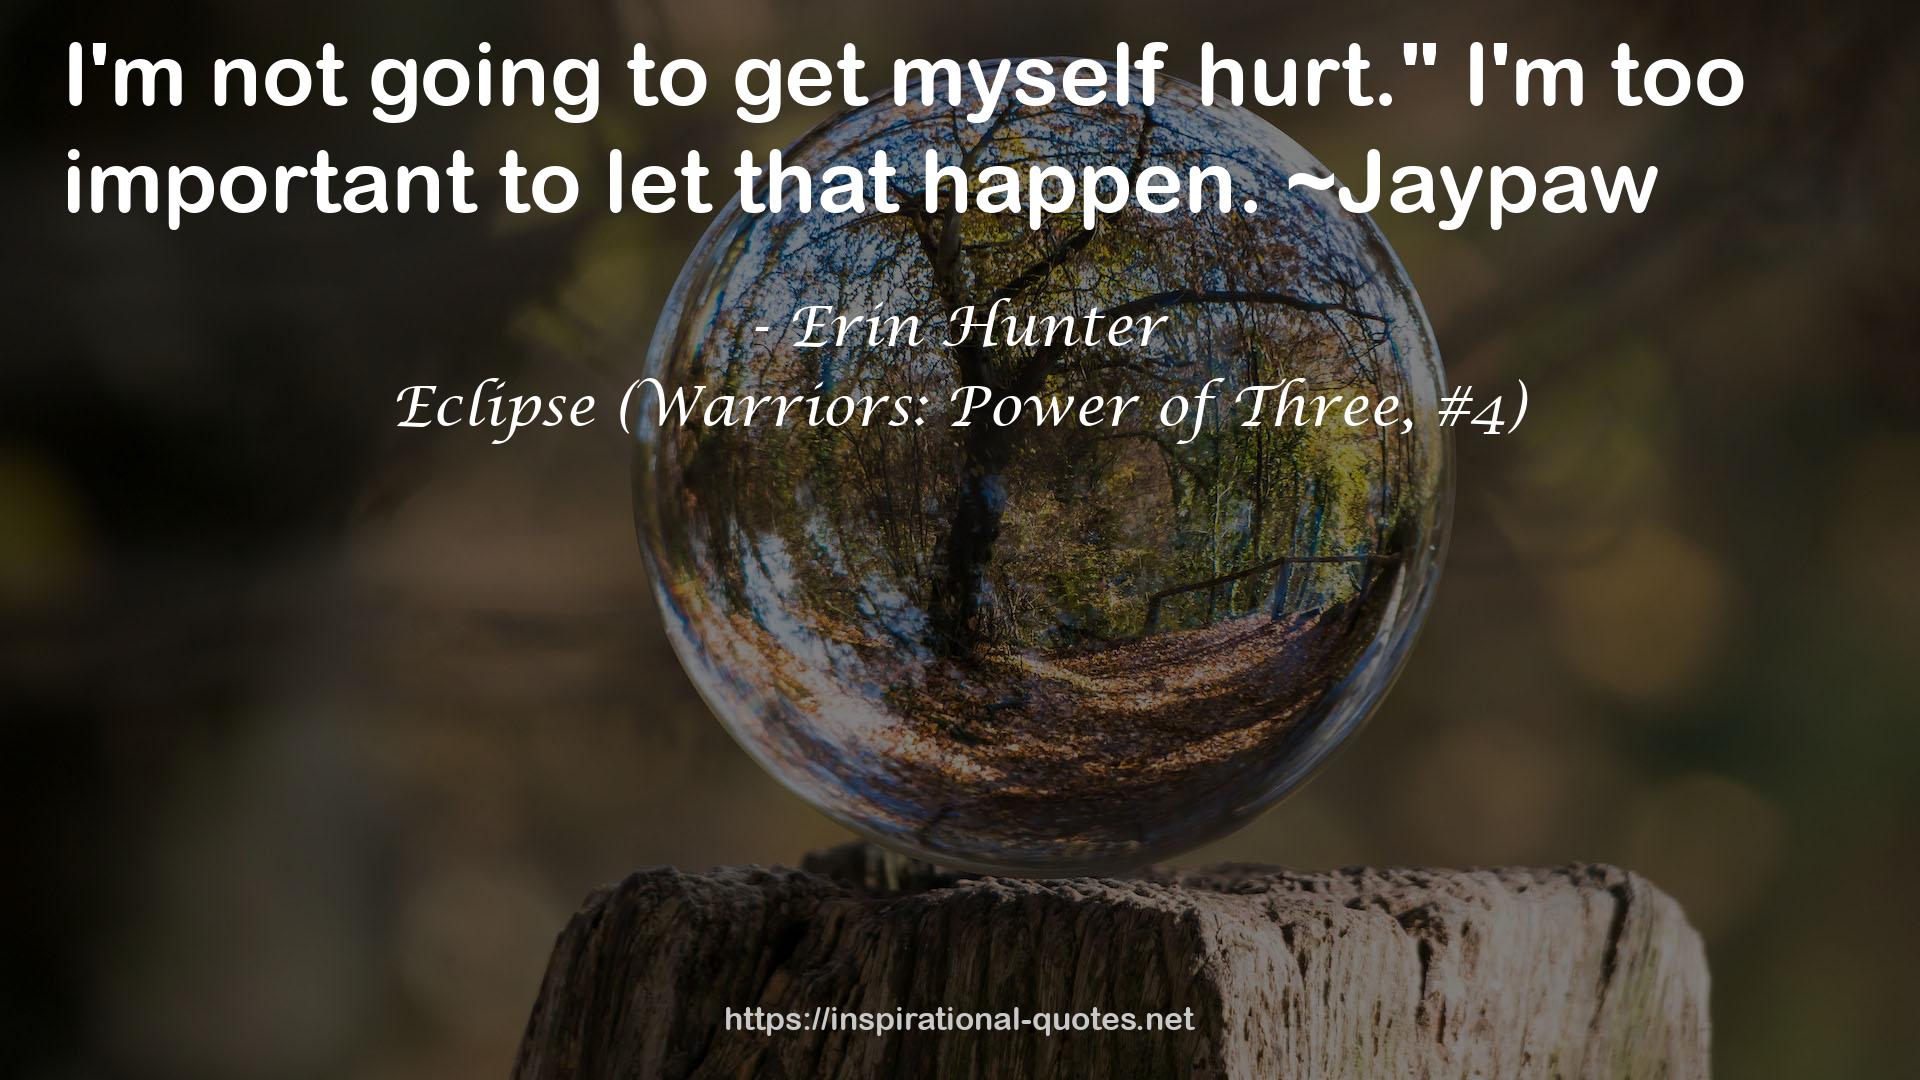 Eclipse (Warriors: Power of Three, #4) QUOTES